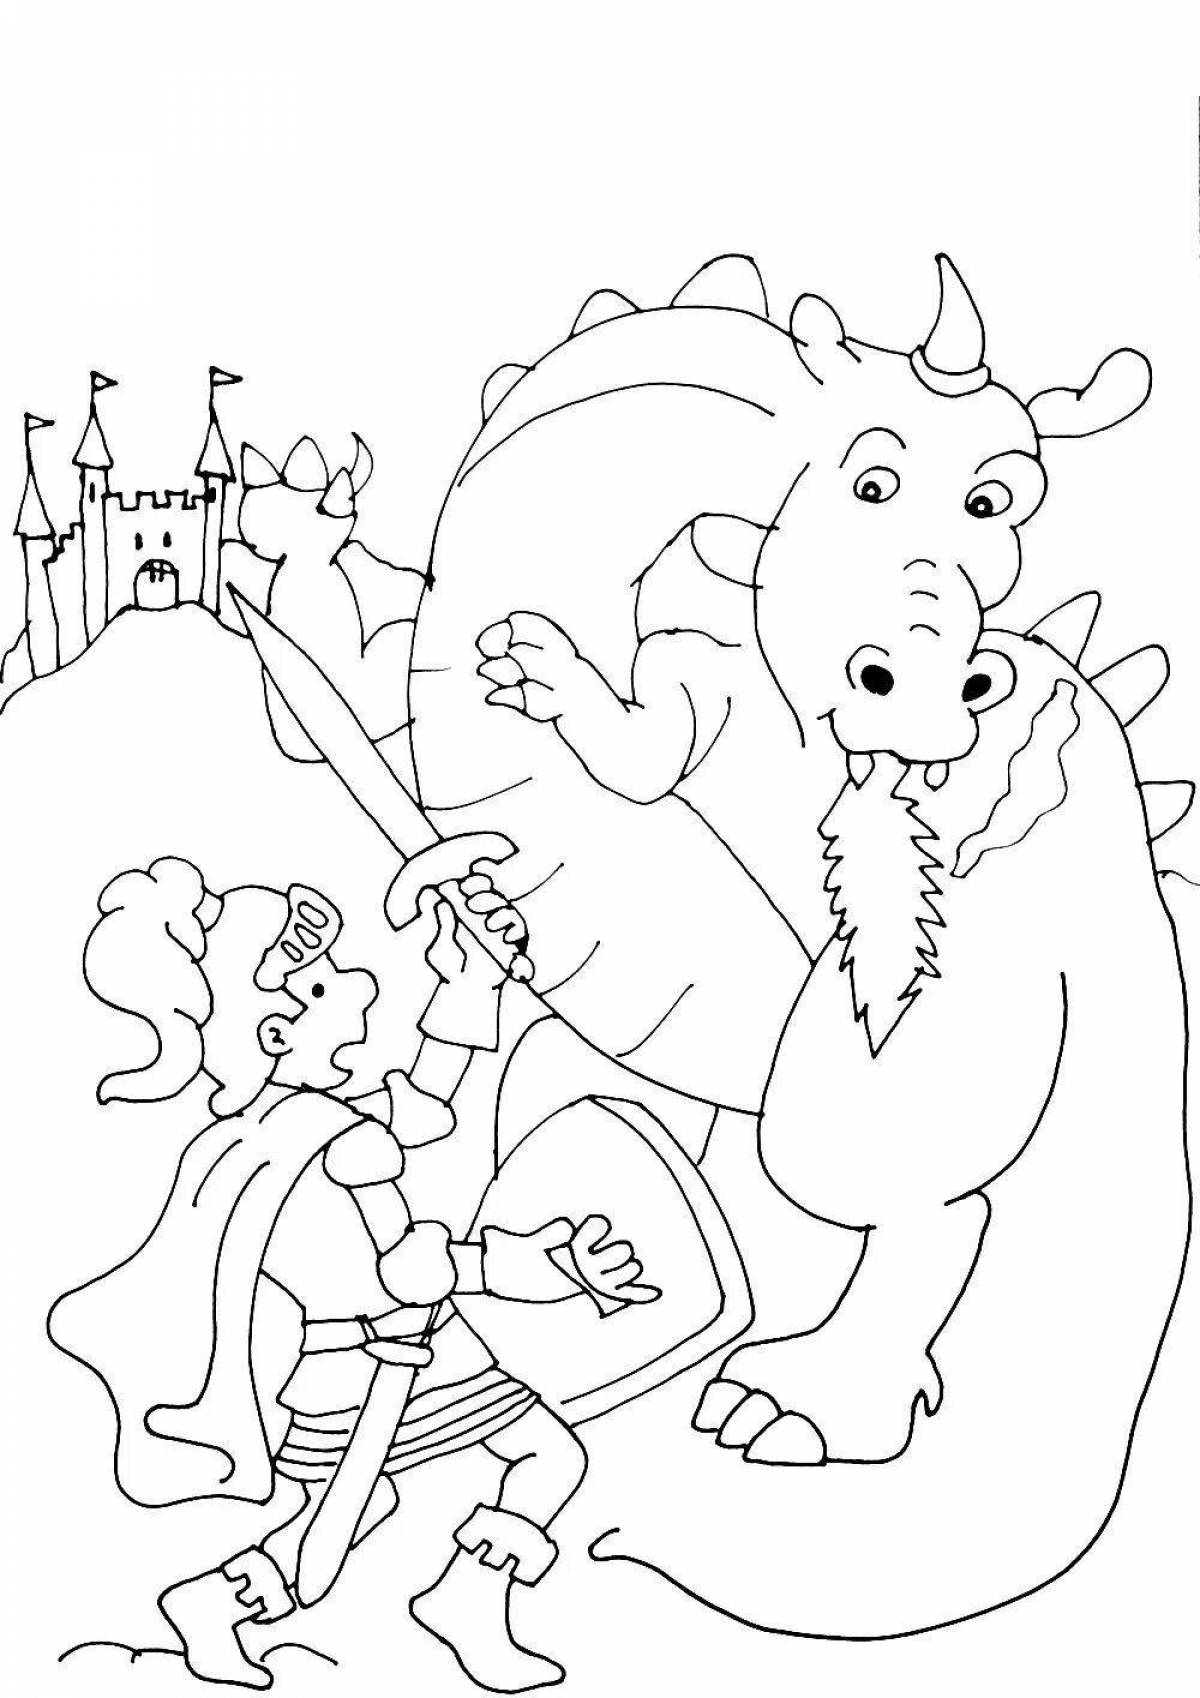 Impressive knight and dragon coloring page